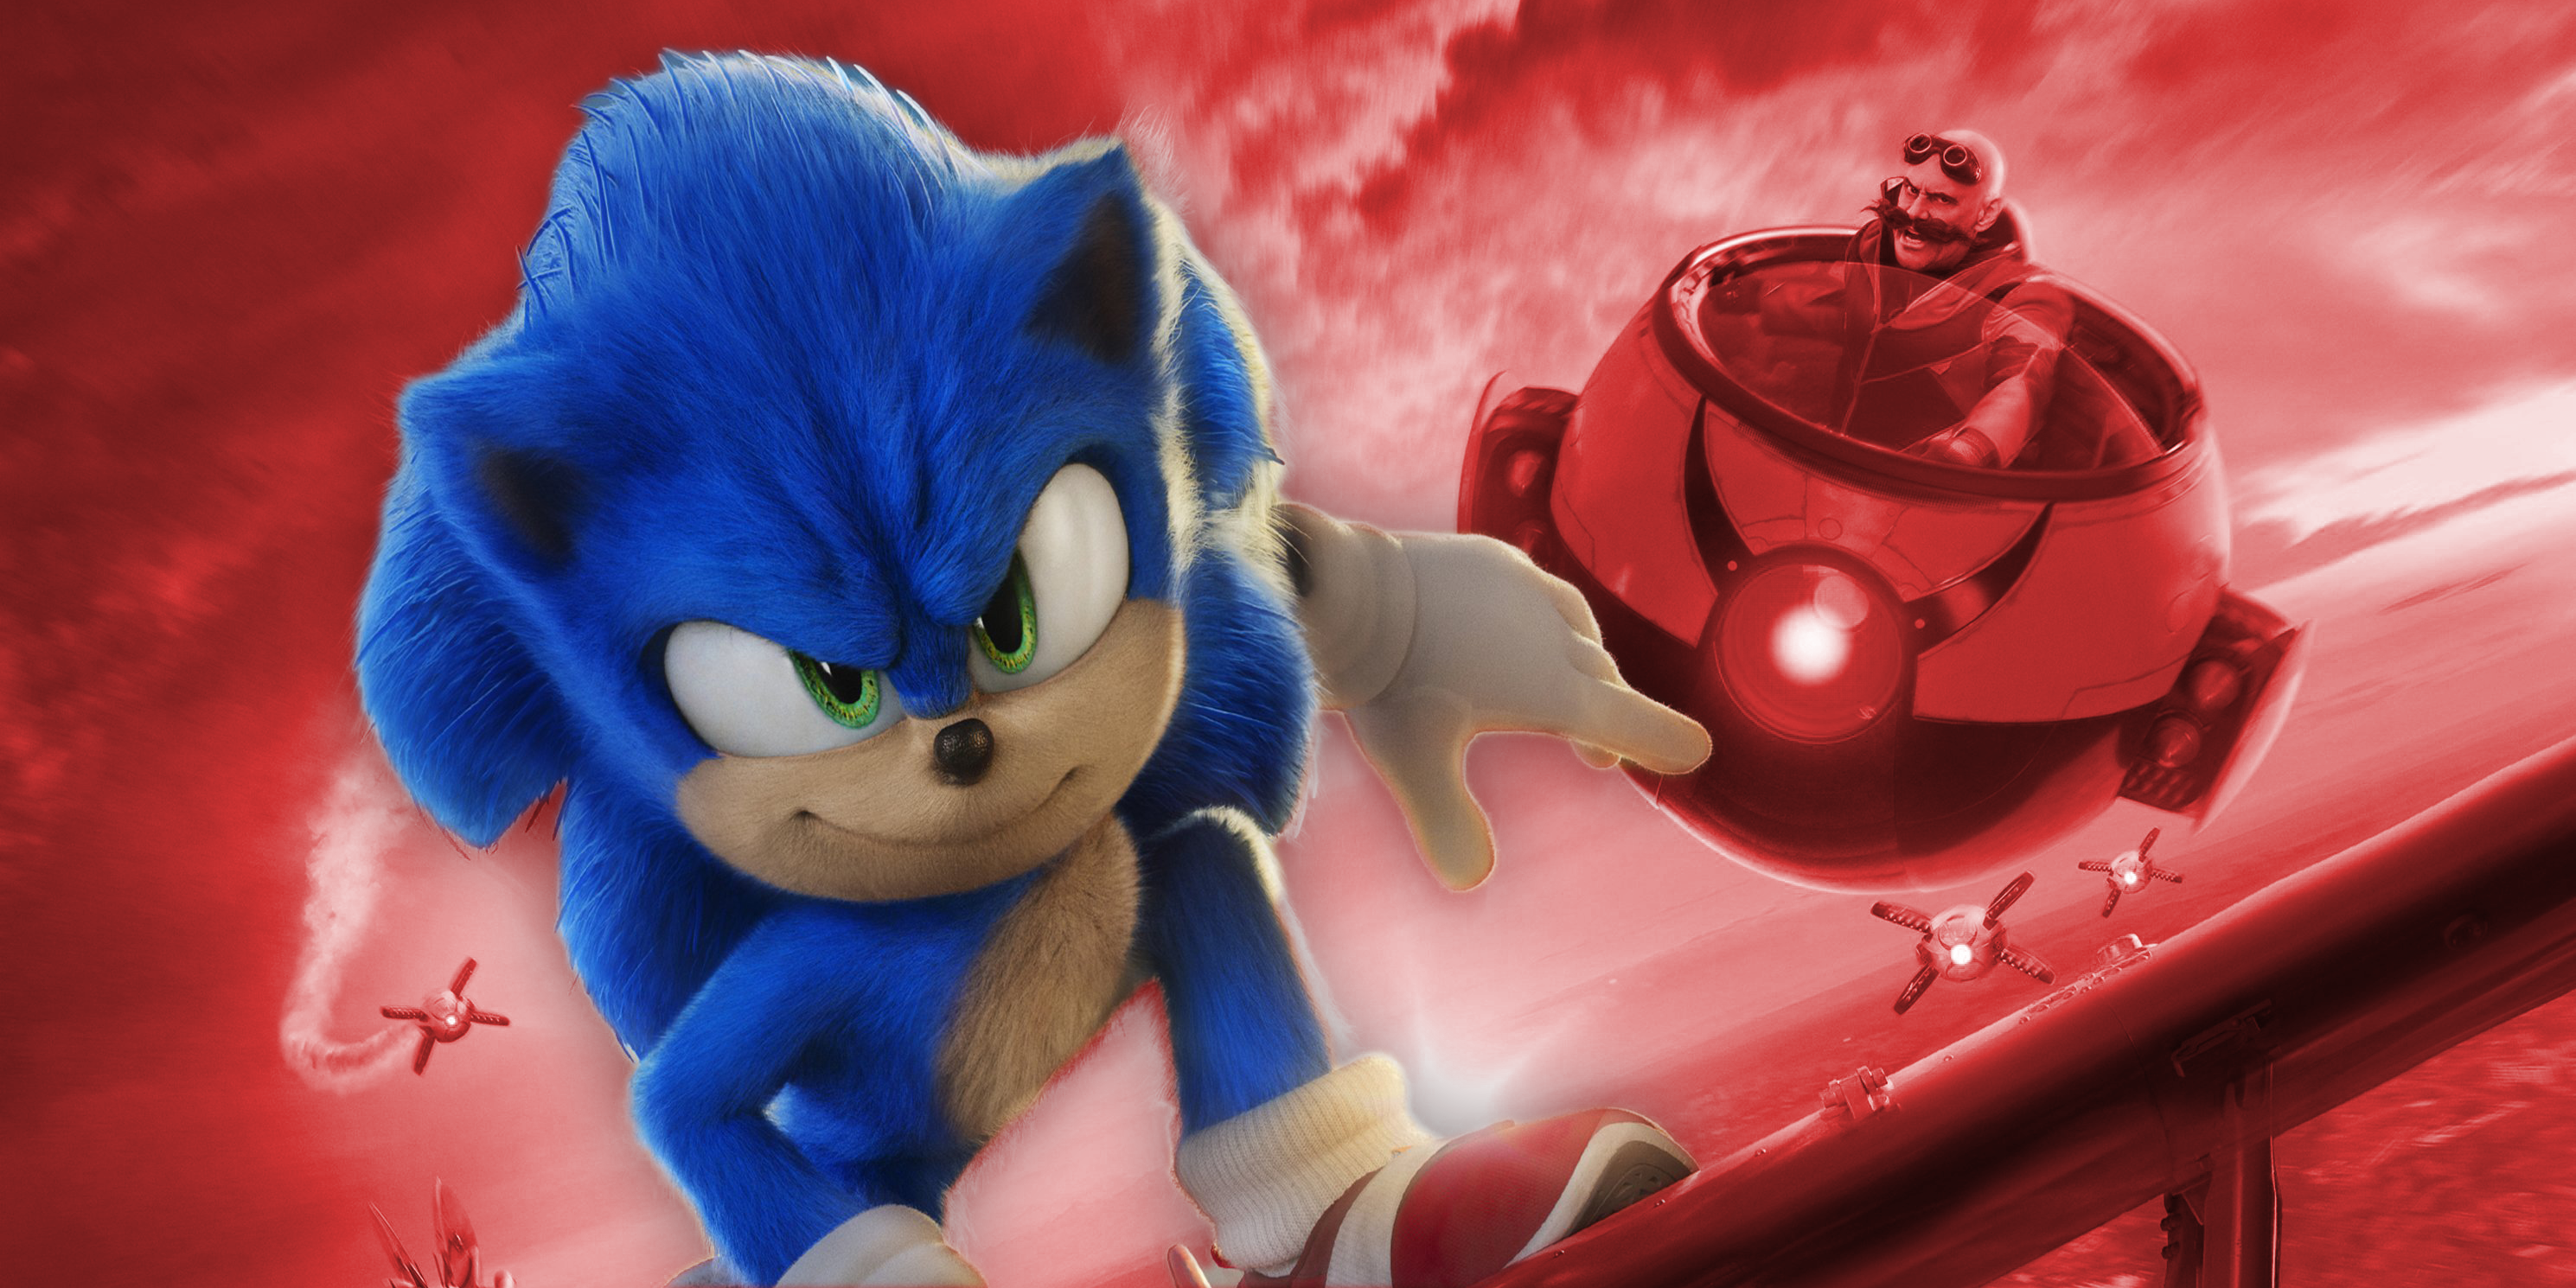 Shadow The Hedgehog Sonic The Hedgehog 2 Sonic And The Black